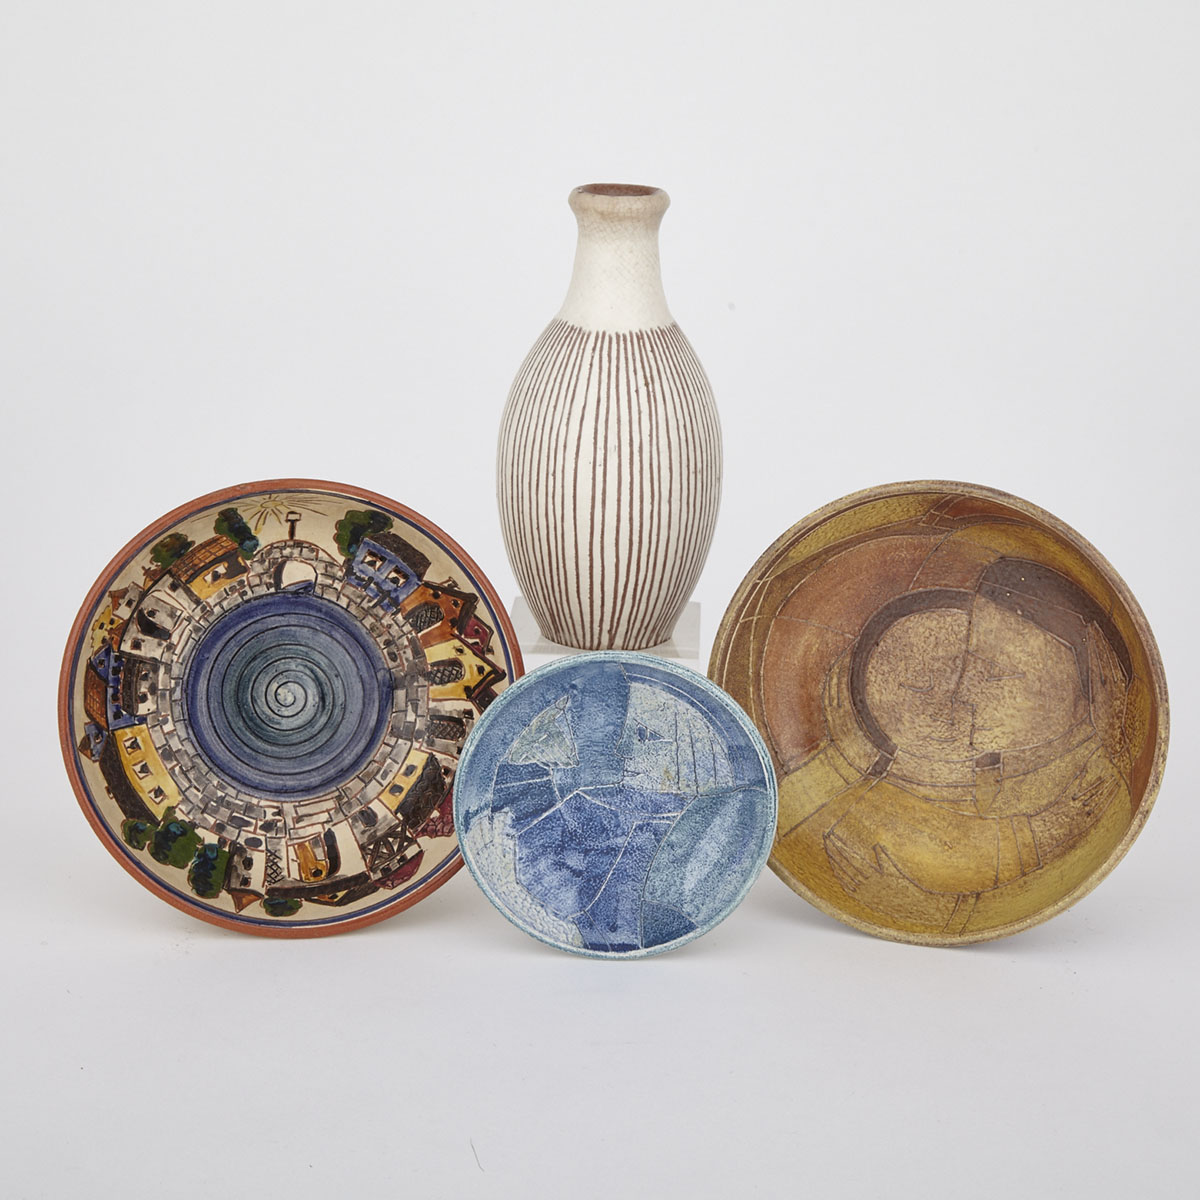 Brooklin Pottery Vase, Two Small Shallow Dishes and an Early Rothenburg Bowl, Theo and Susan Harlander, c.1950-75